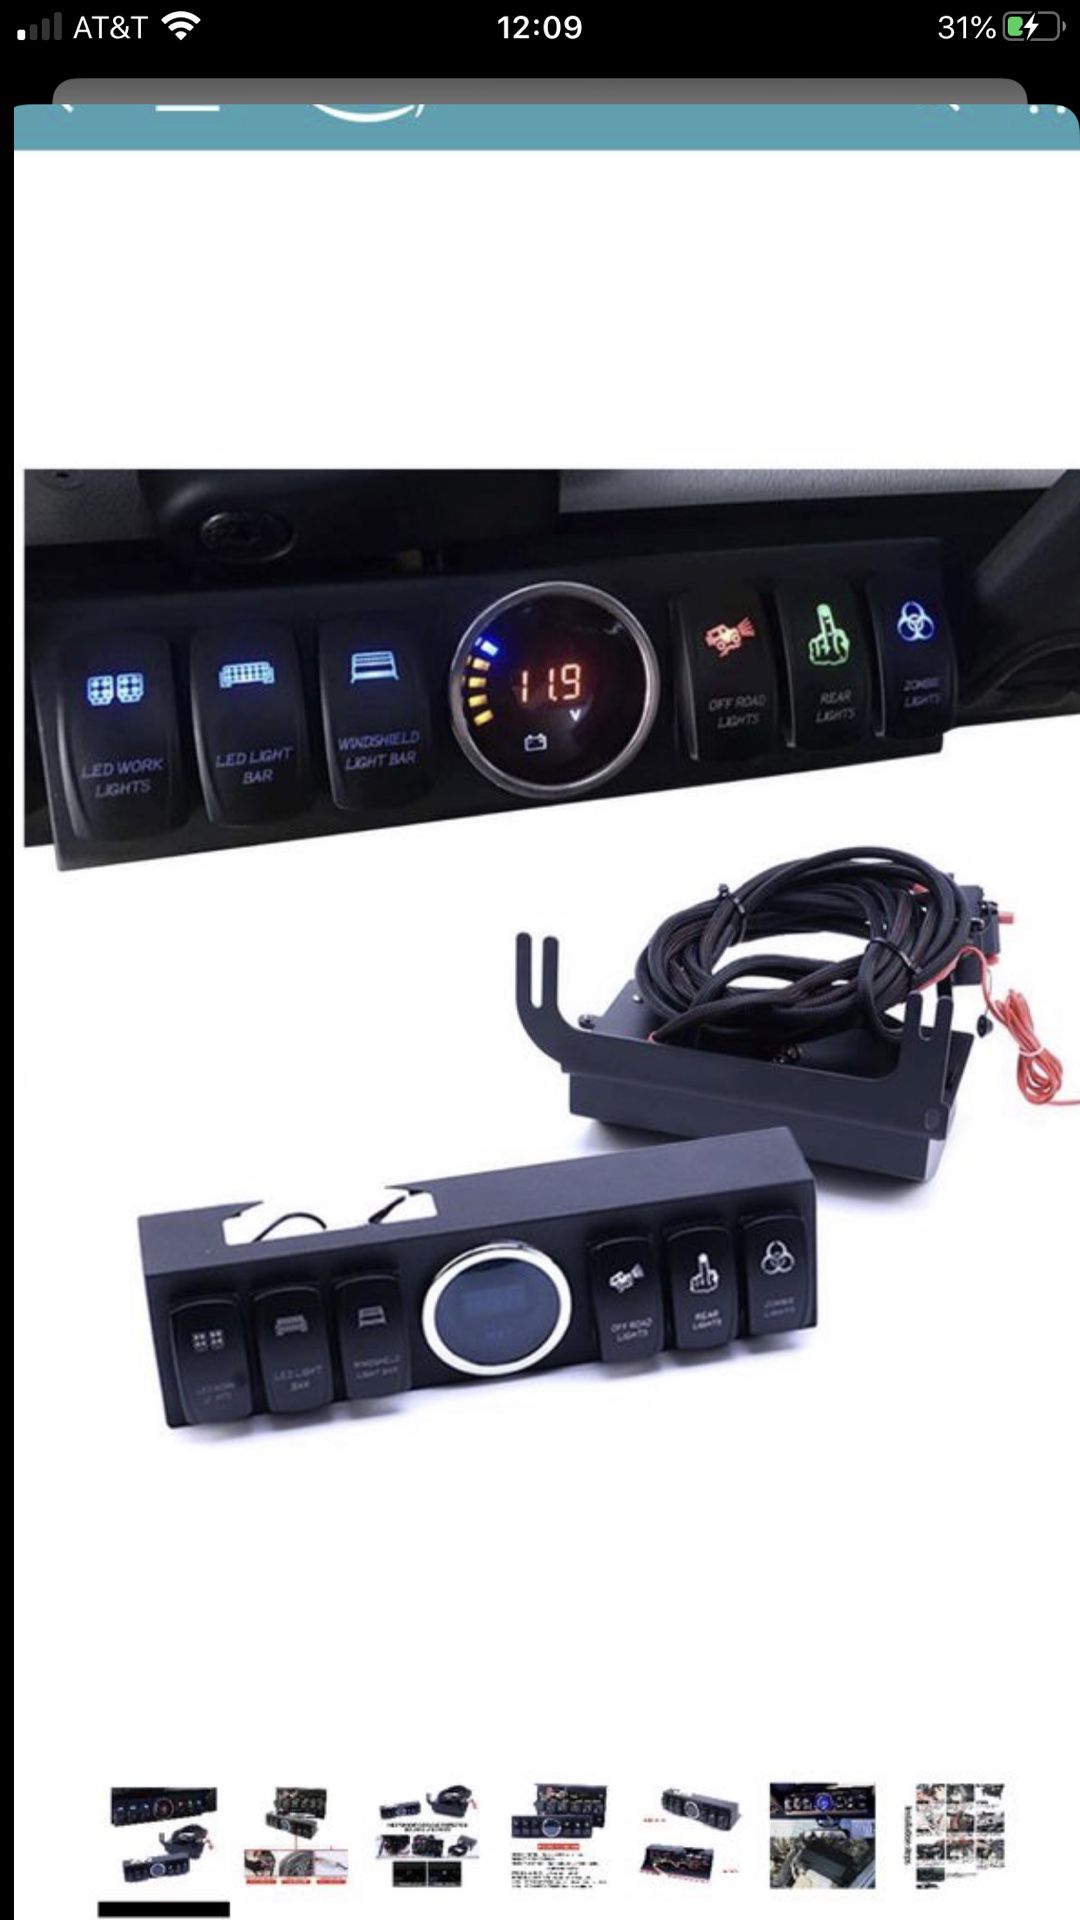 6 switch control panel box for Jeep Wrangler led light bar